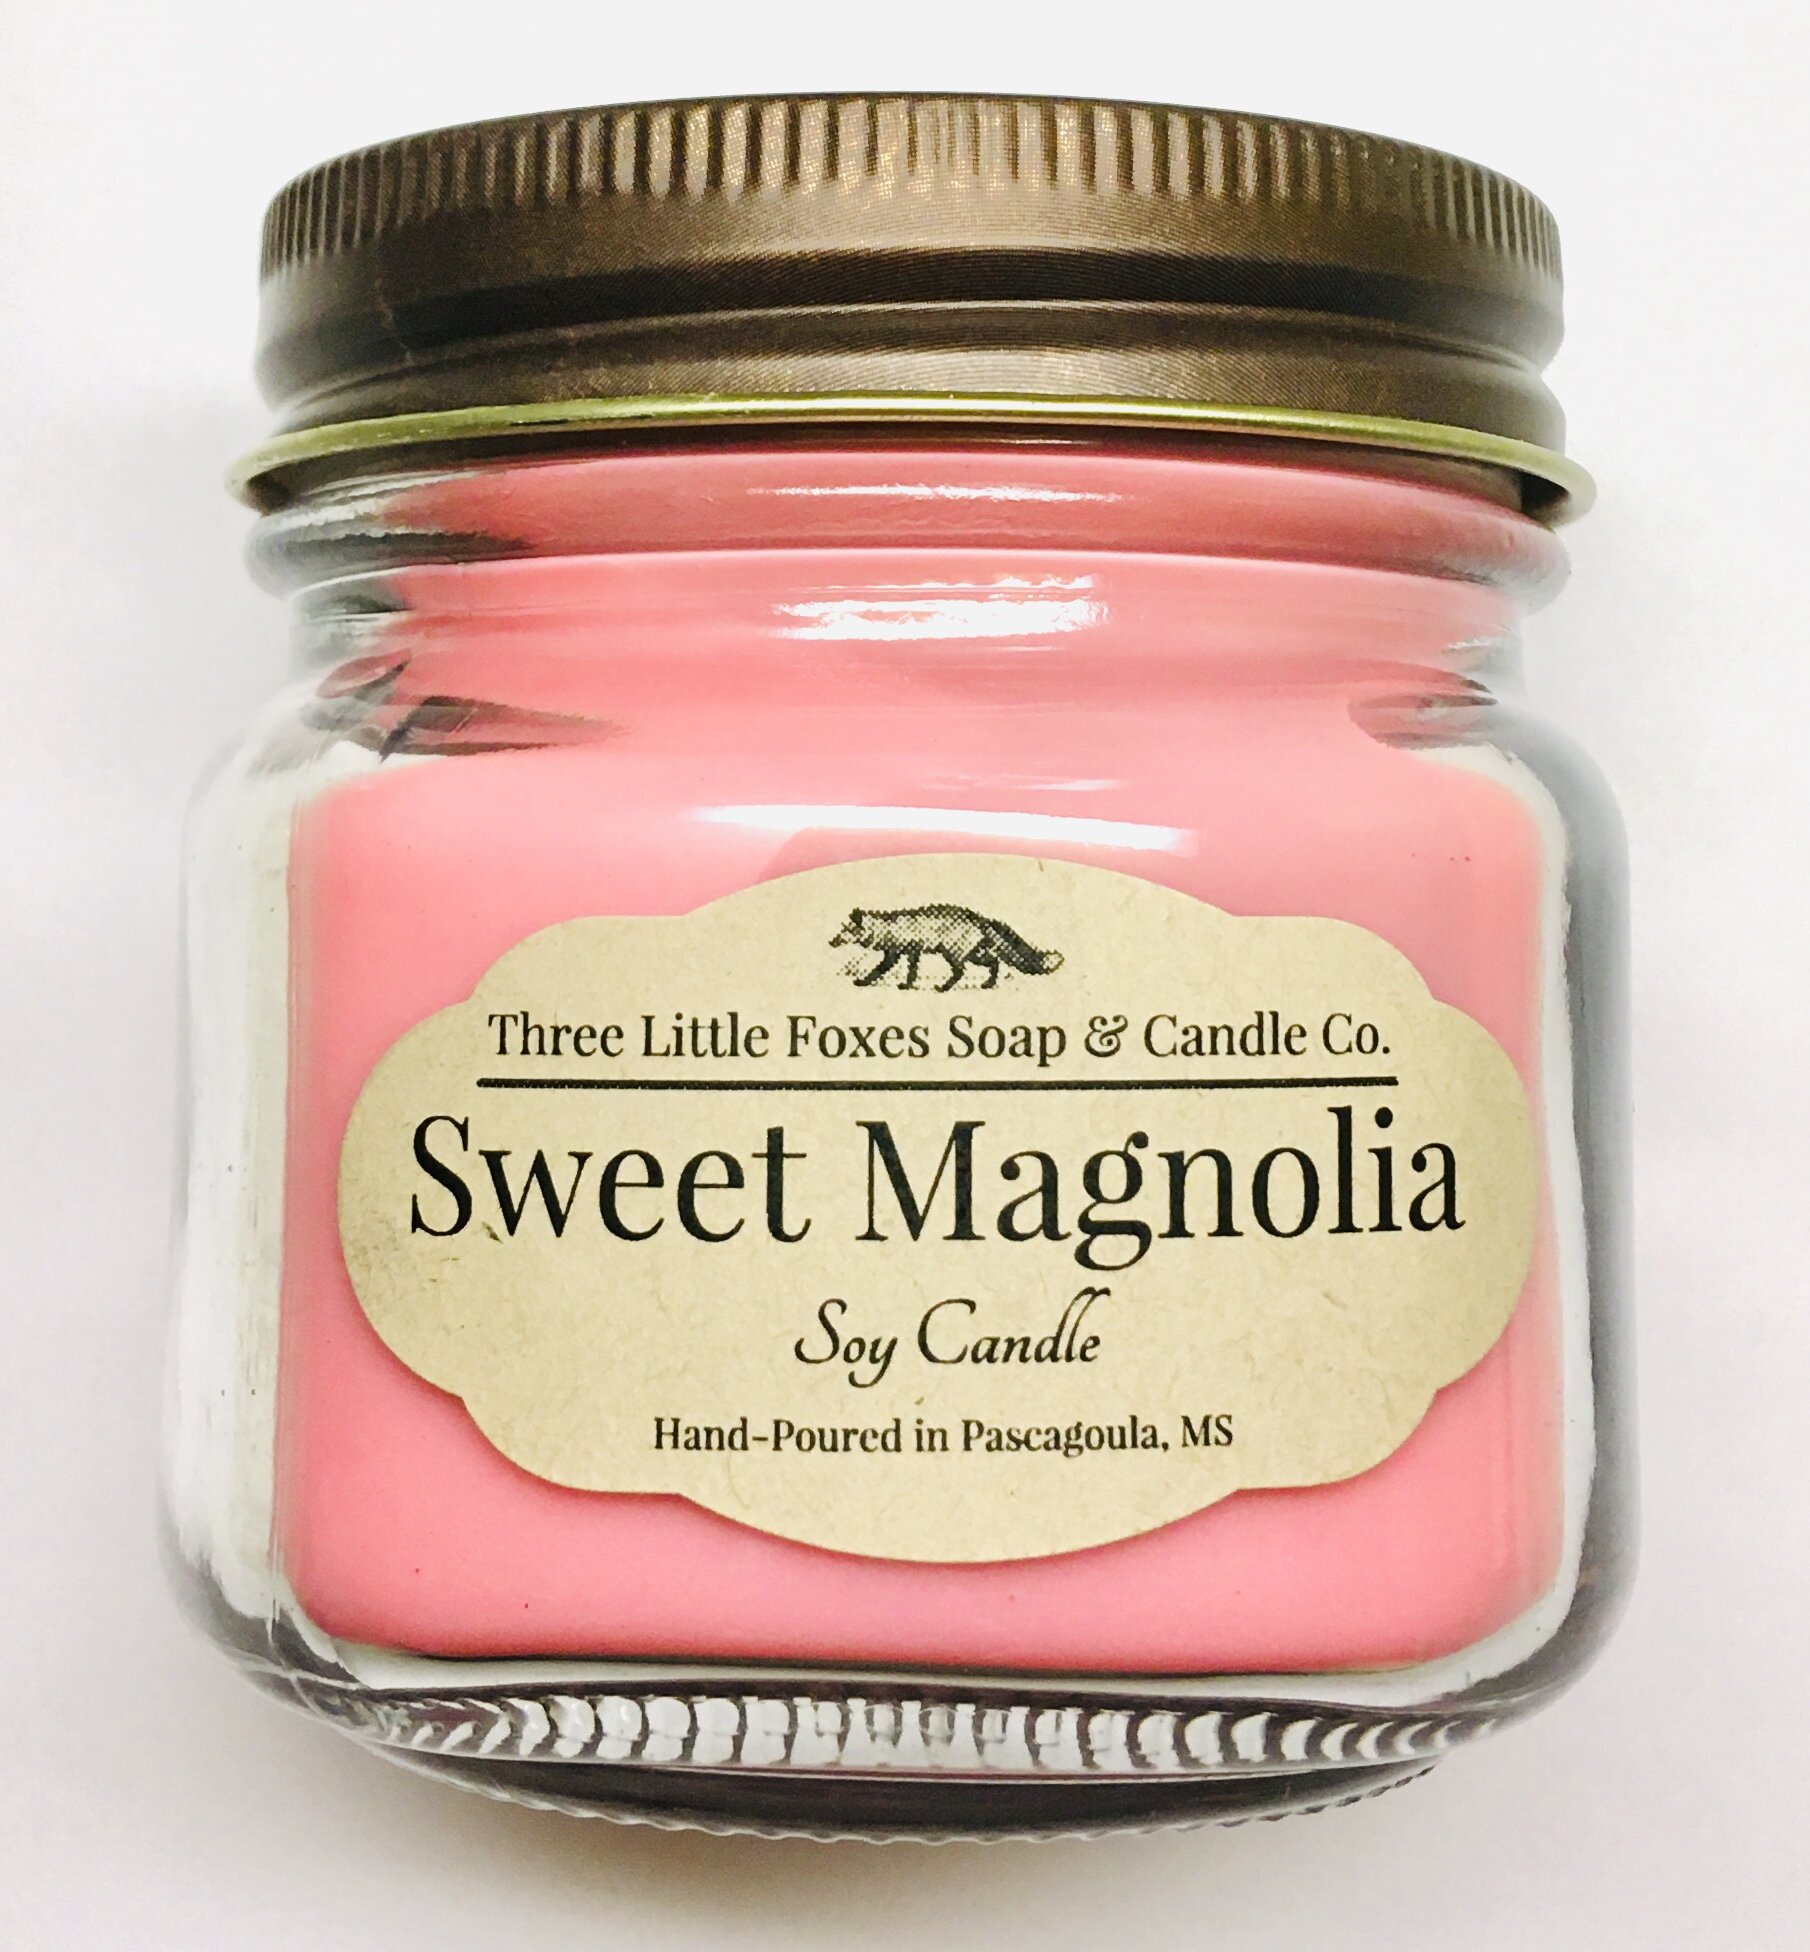 Sweet Magnolia Soy Candle